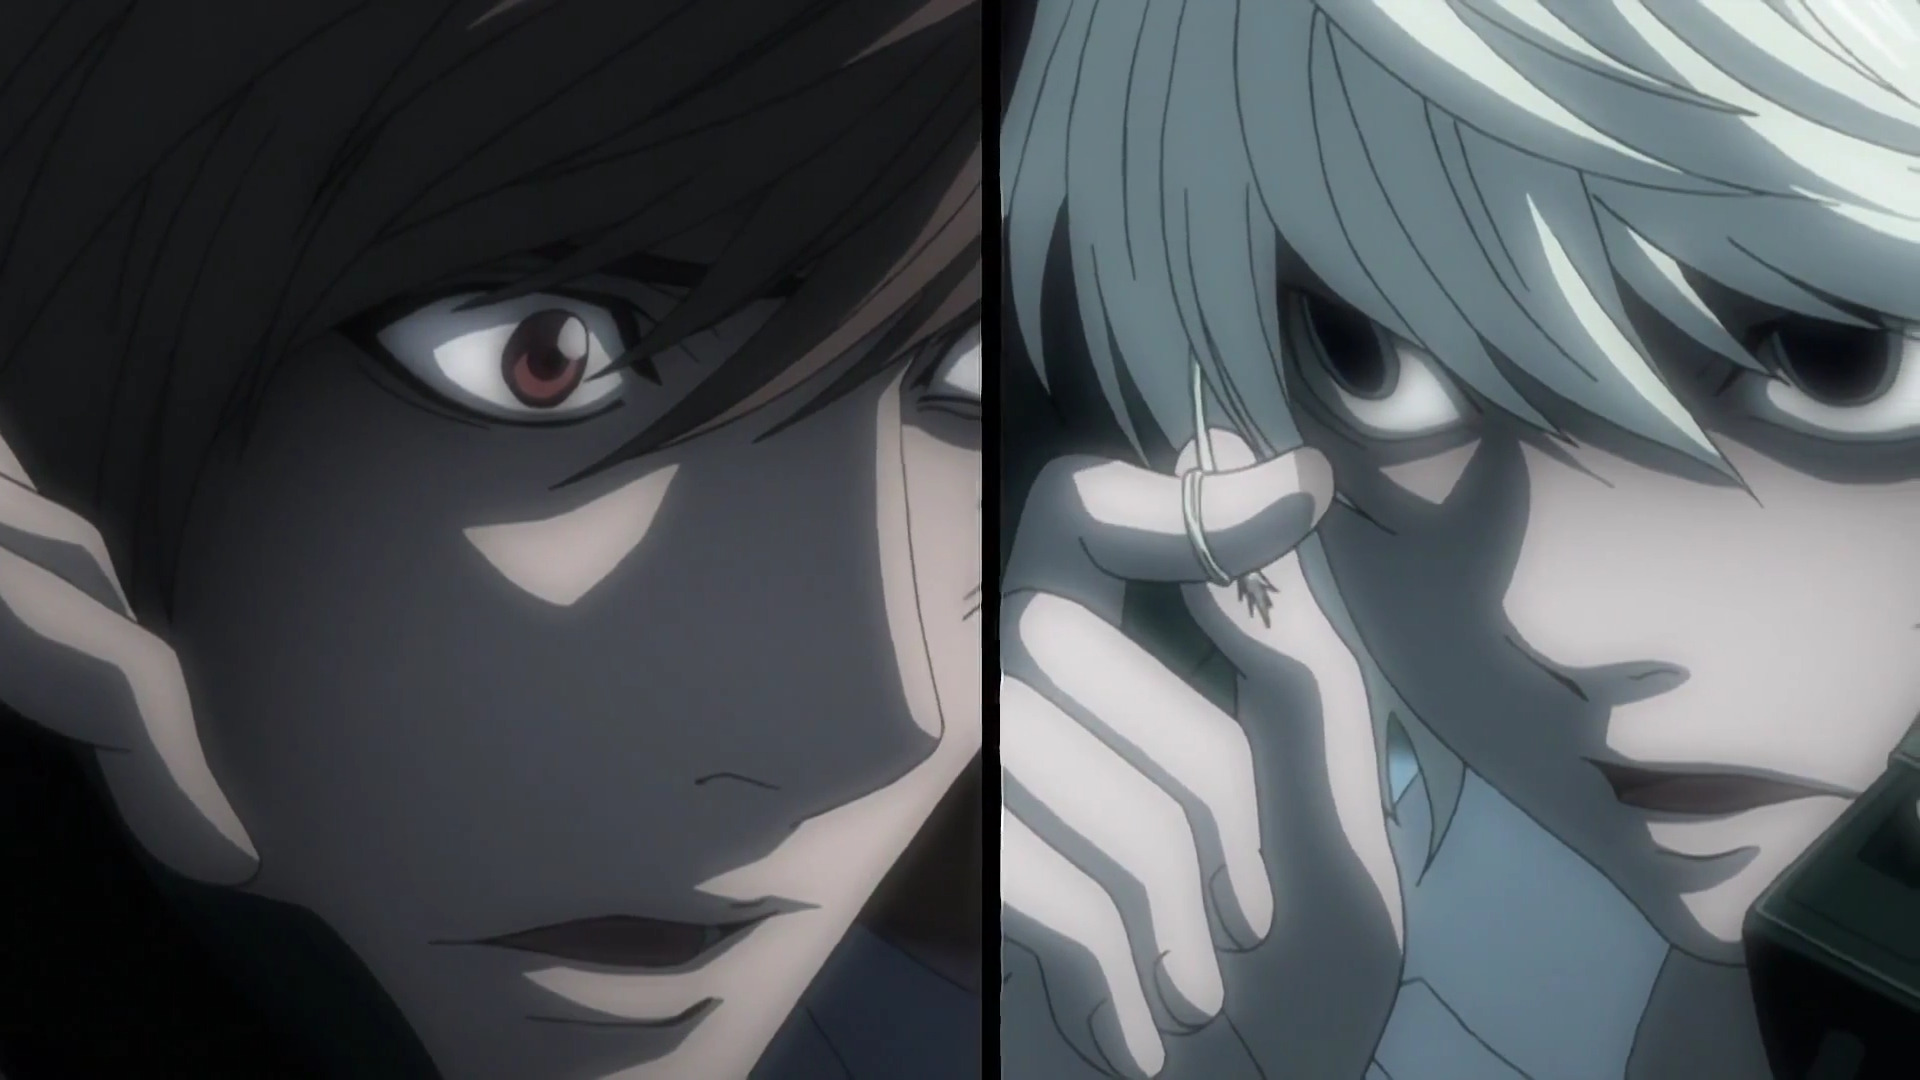 L lawliet having a sinister laugh on the last episode of death n... -  Arthub.ai